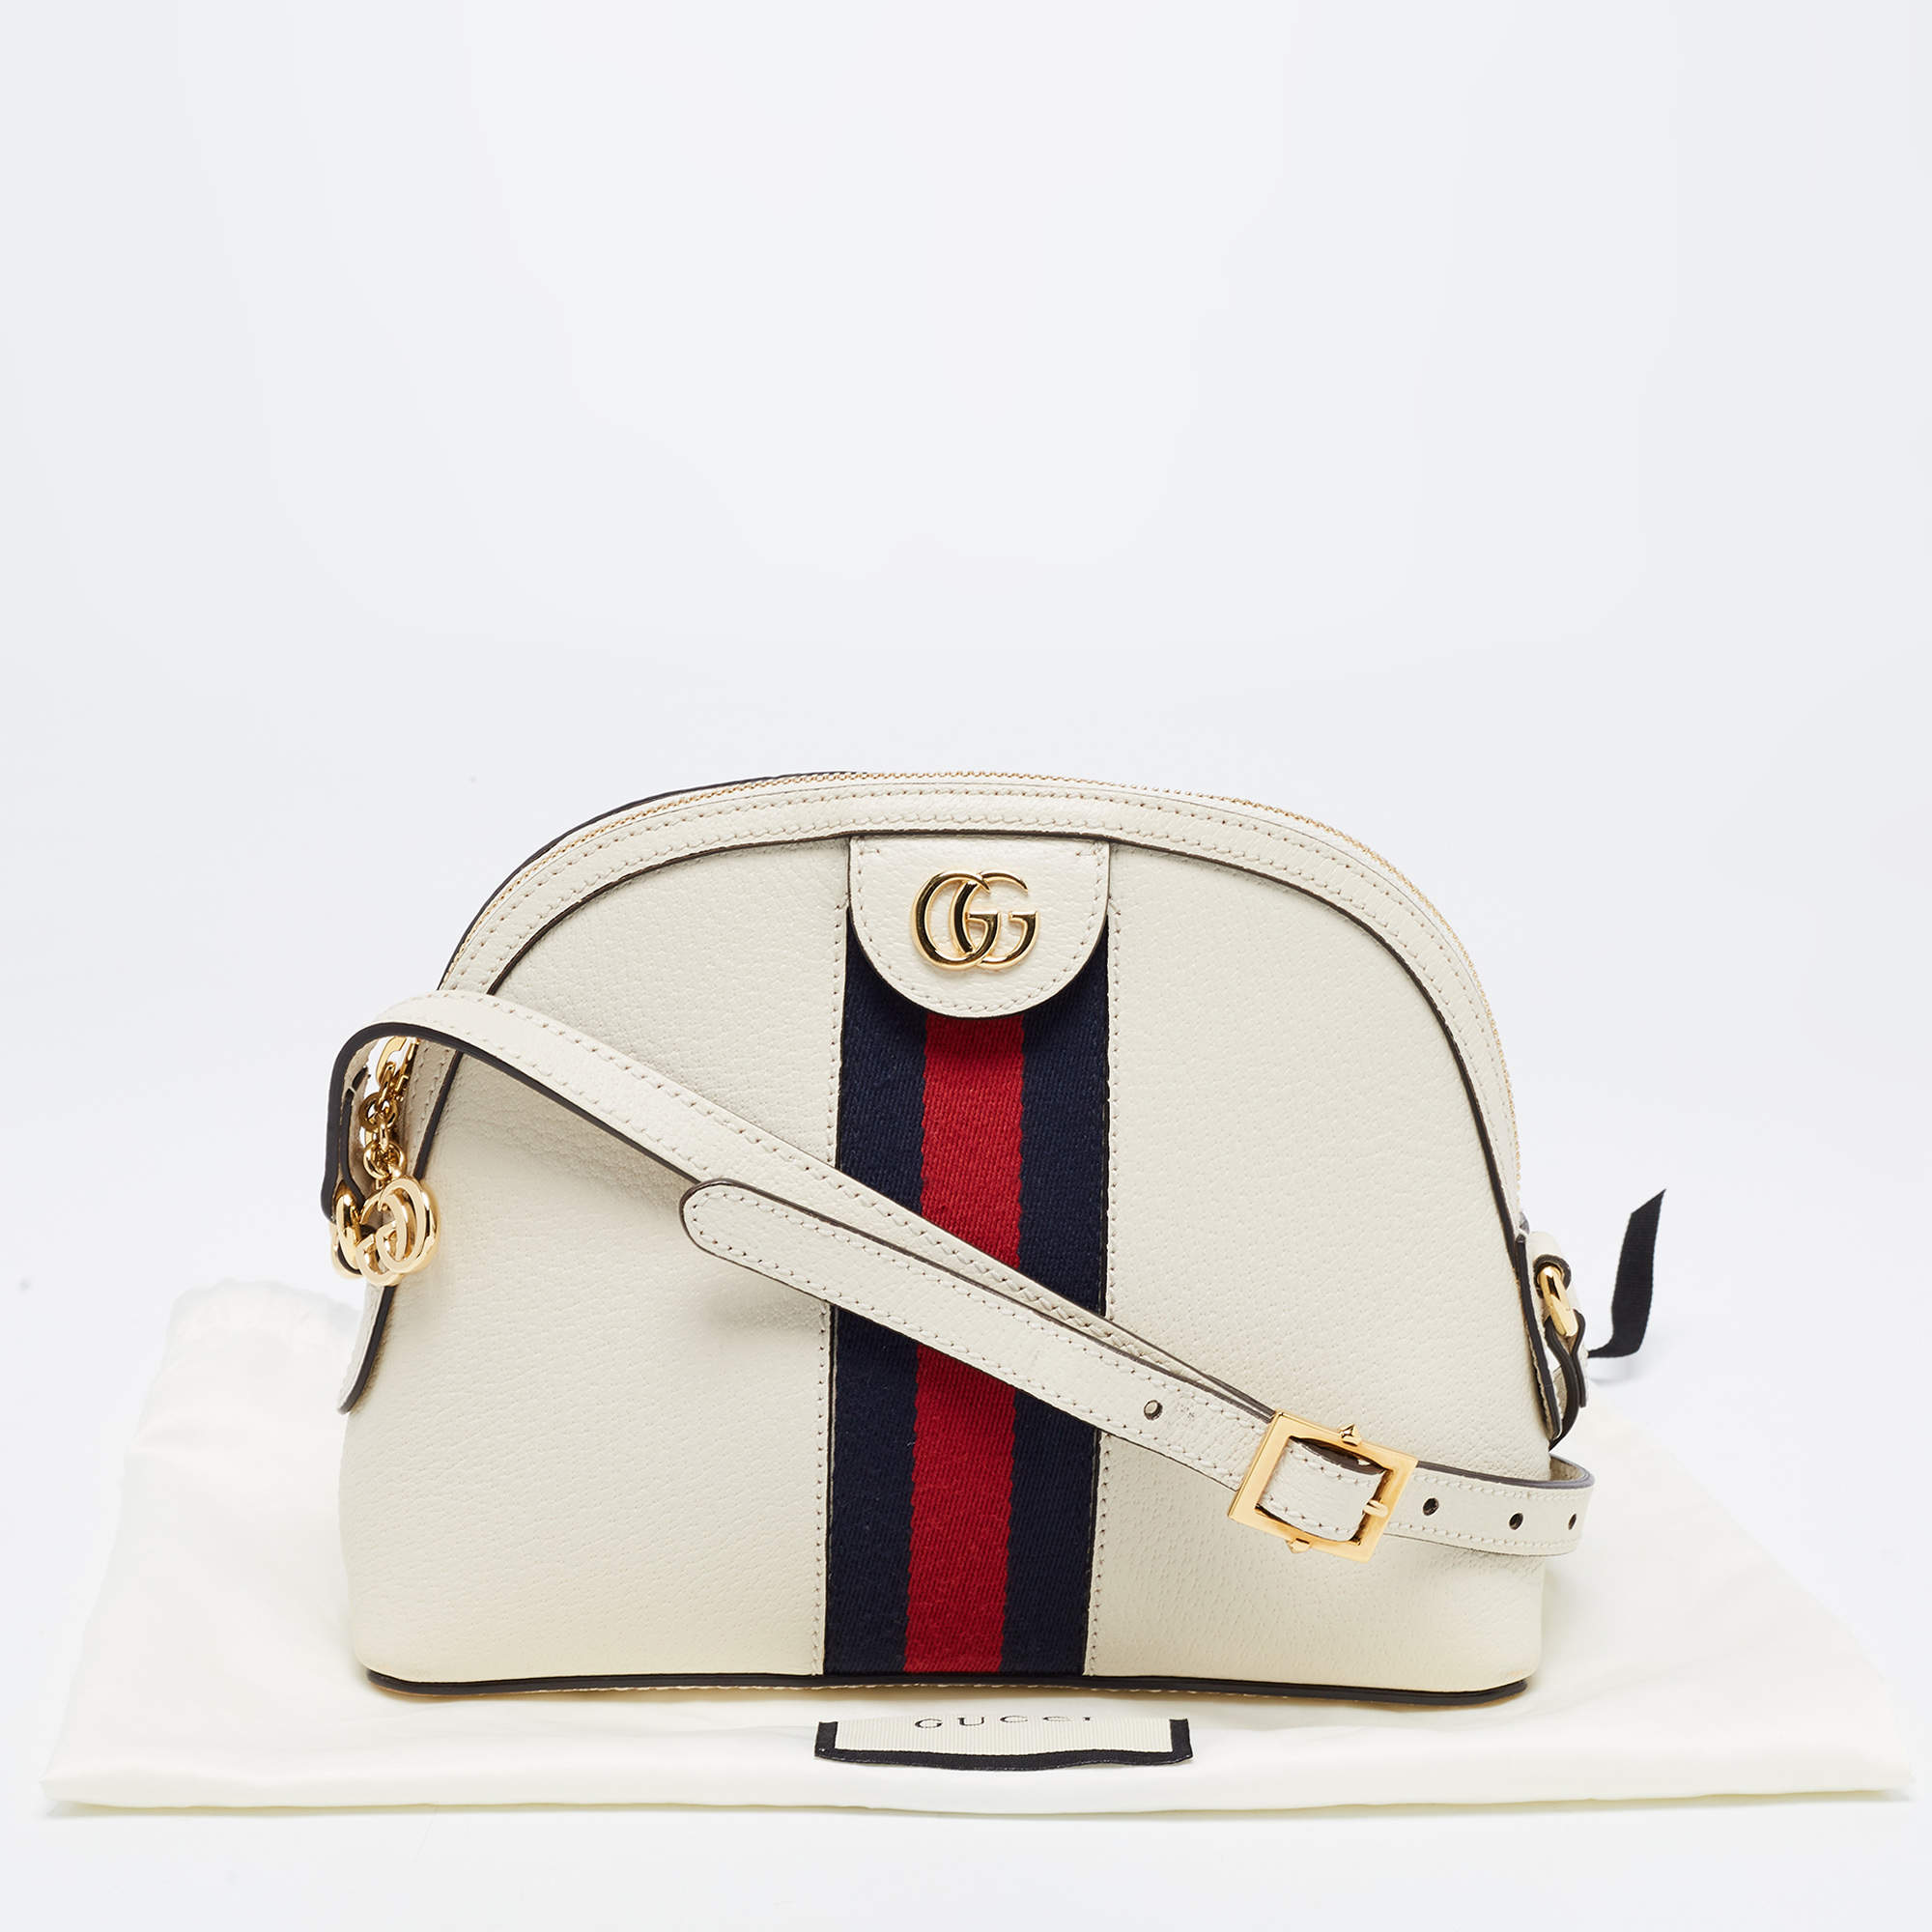 GUCCI #OPHIDIA GG SMALL SHOULDER BAG 980 #WOMEN #SS19 For more Gucci   #gucciophi…